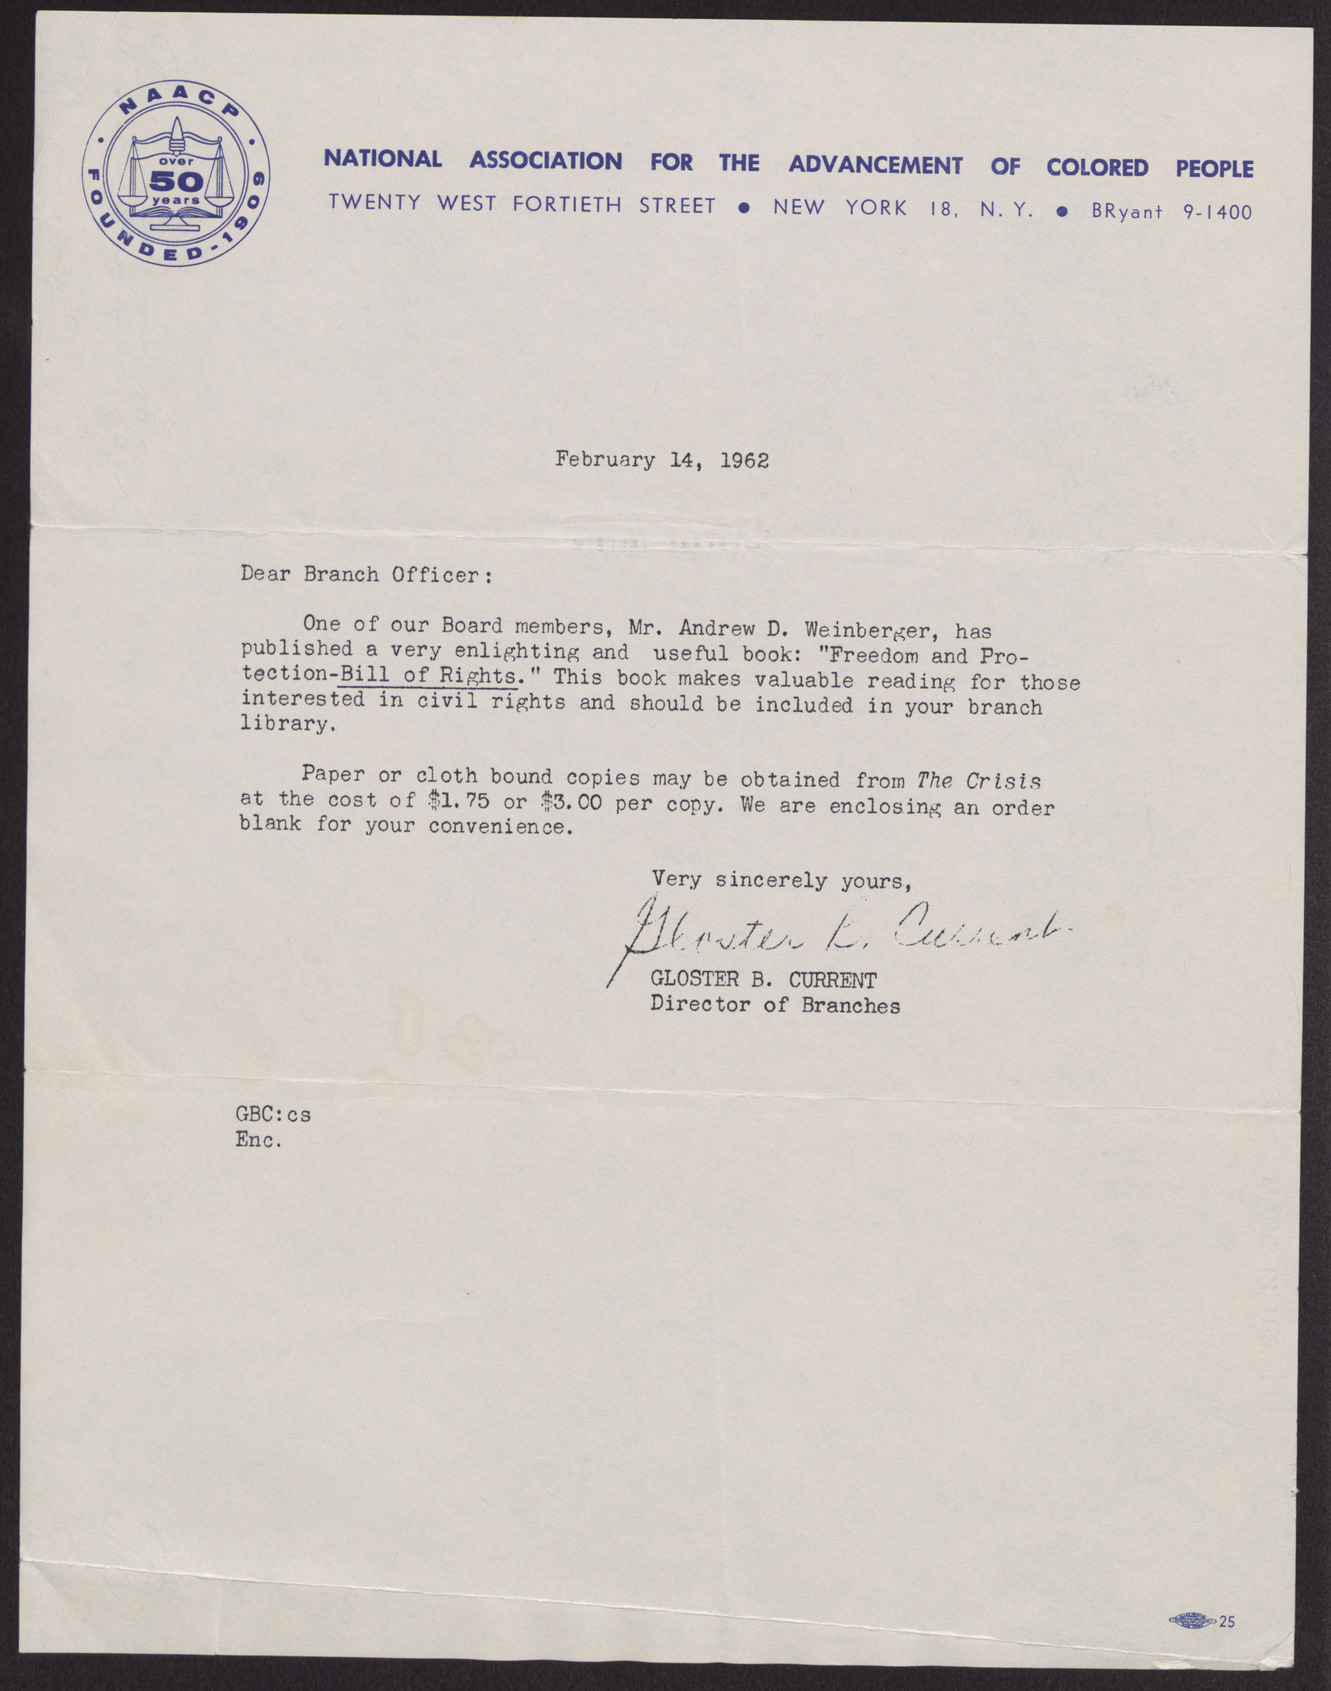 Letter to [unnamed] NAACP Branch Officer from Gloster B. Current, February 14, 1962